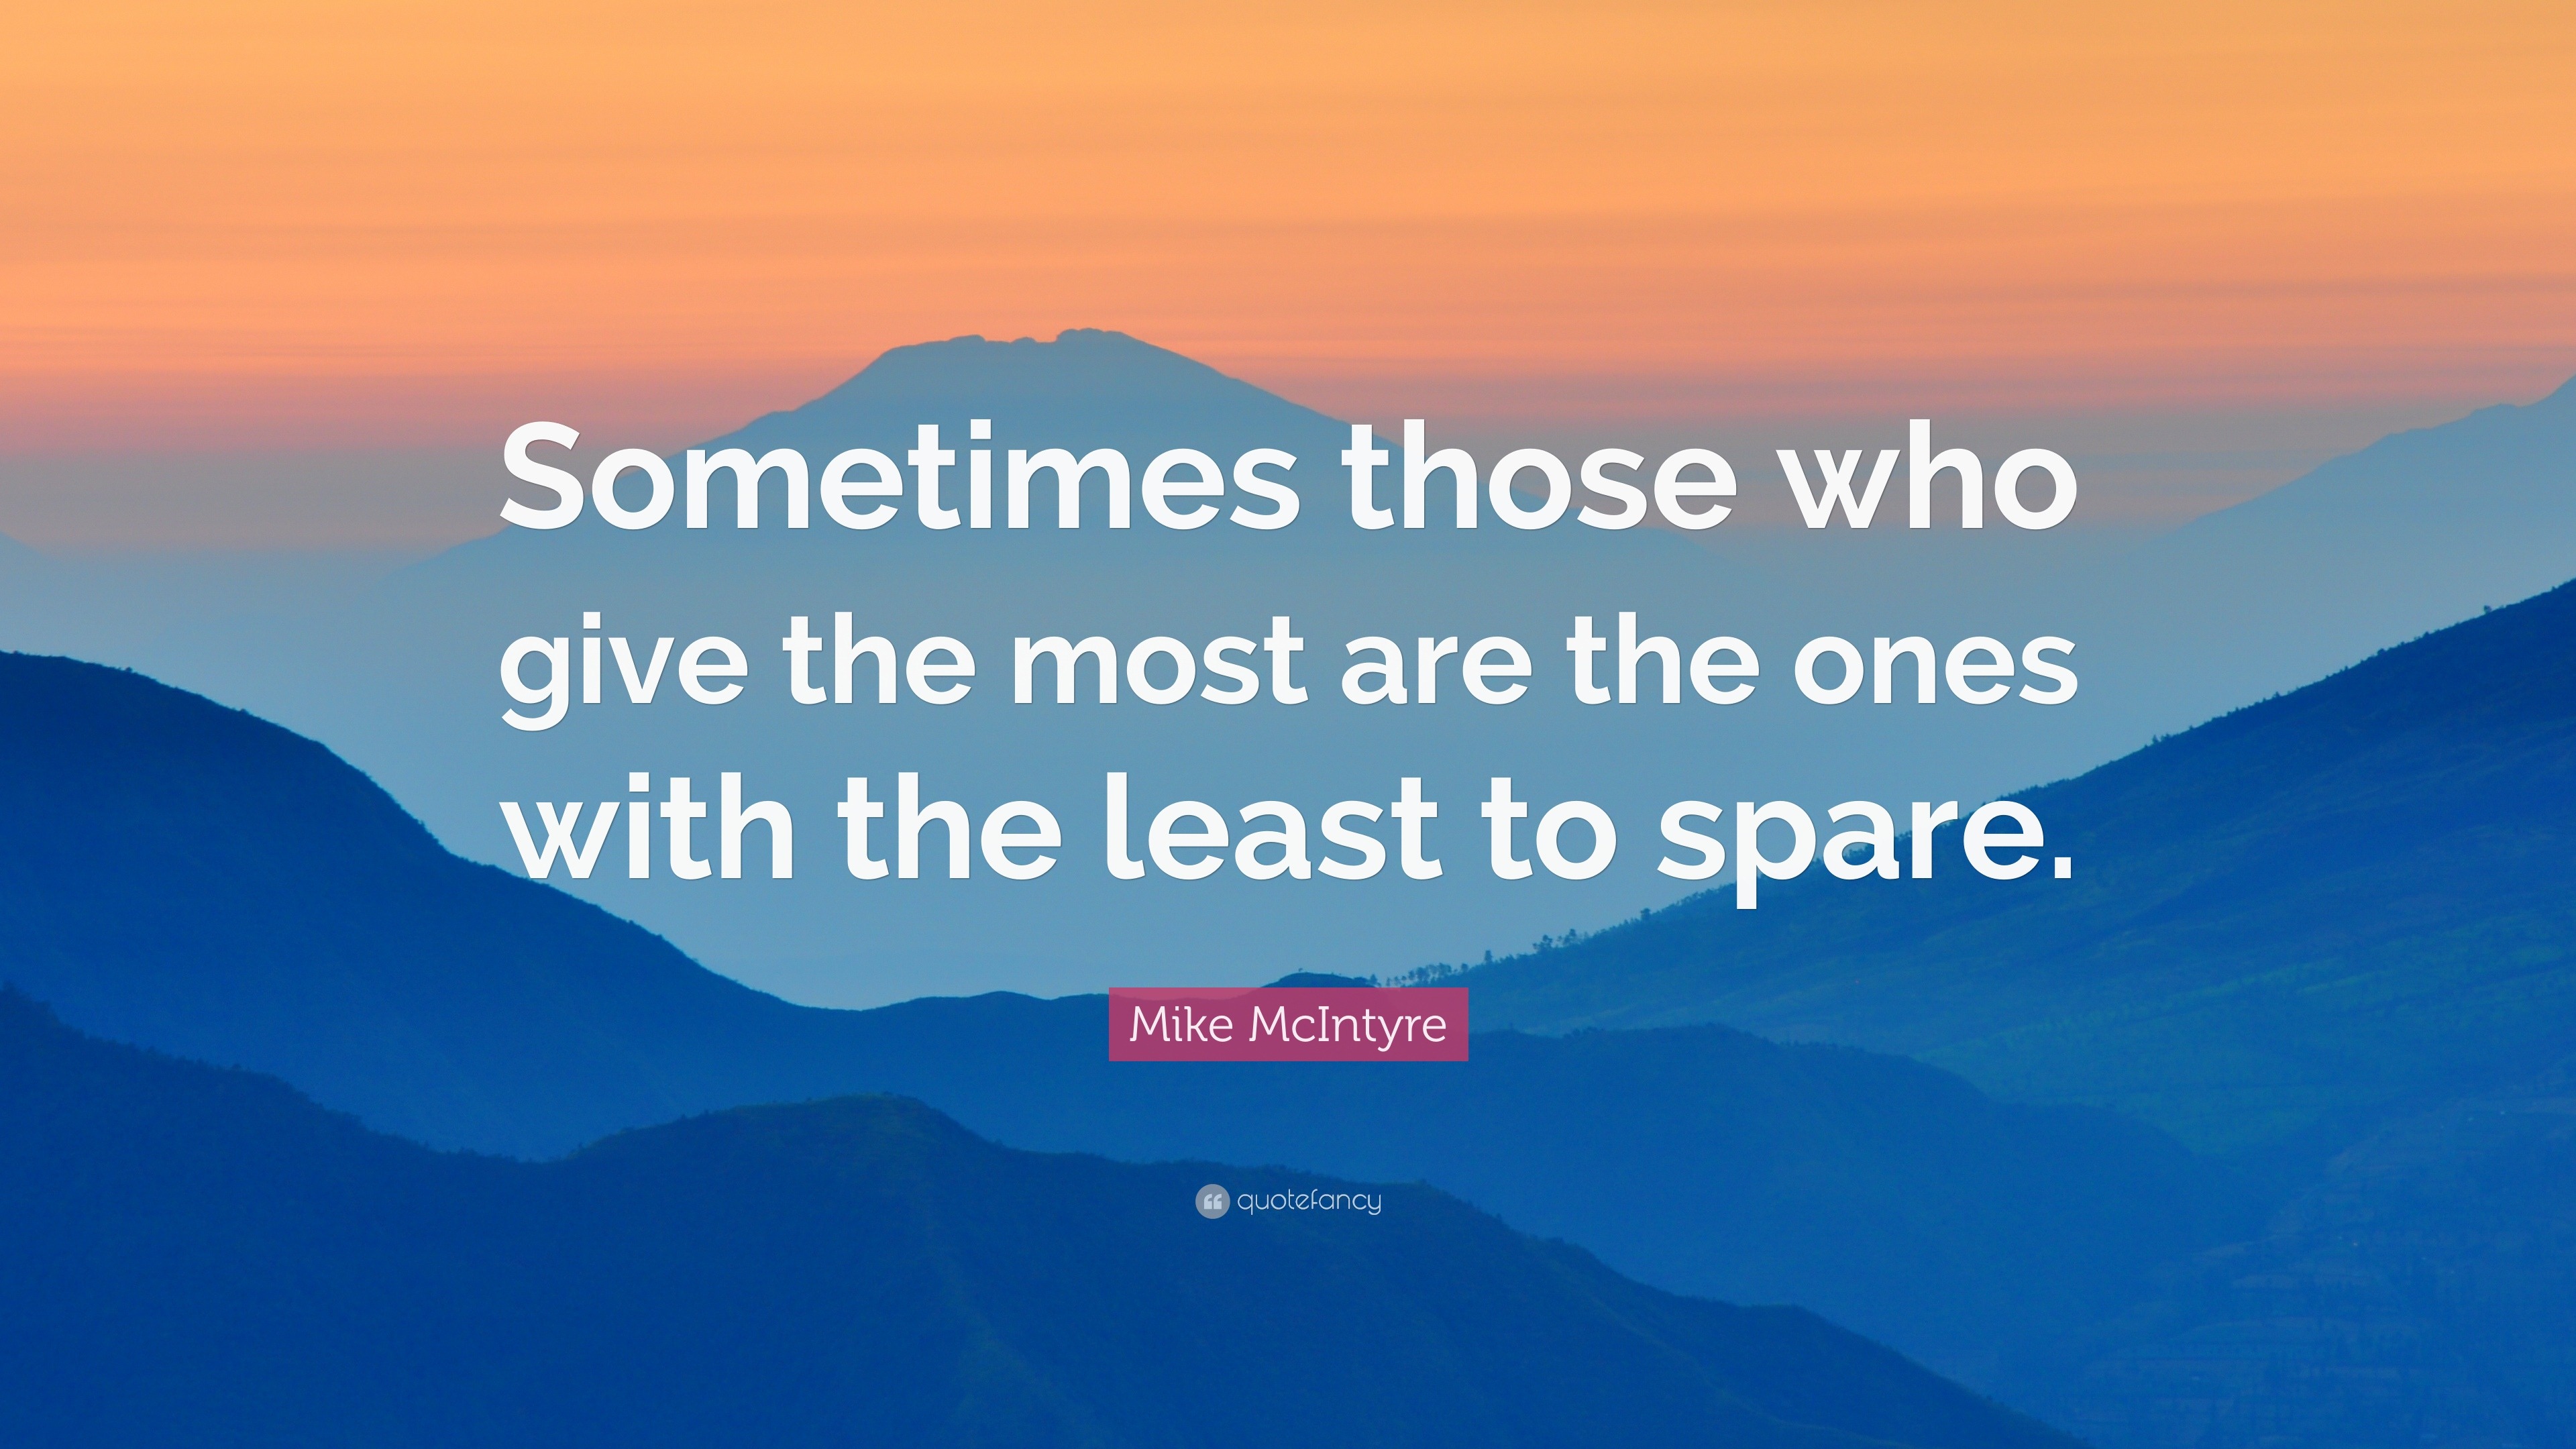 Mike McIntyre Quote: “Sometimes those who give the most are the ones ...